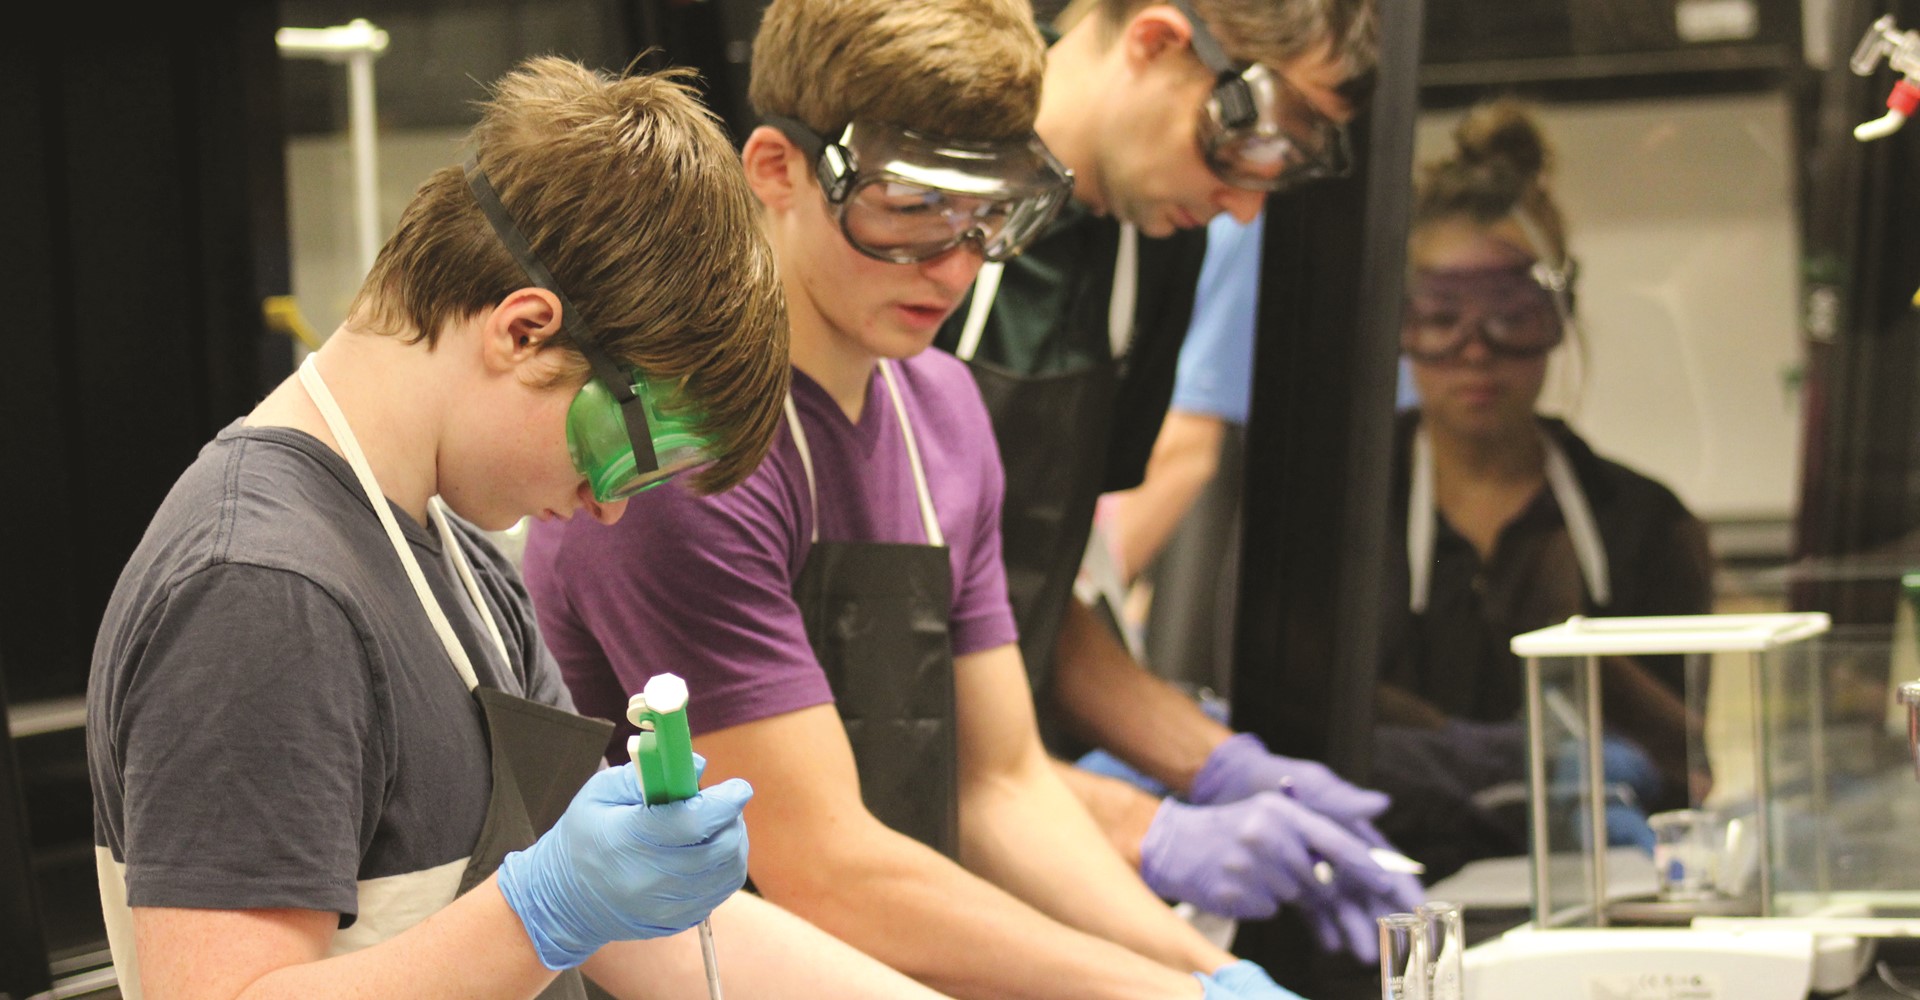 Image shows four students wearing safety goggles, gloves, and aprons participating in a chemistry lab experiment